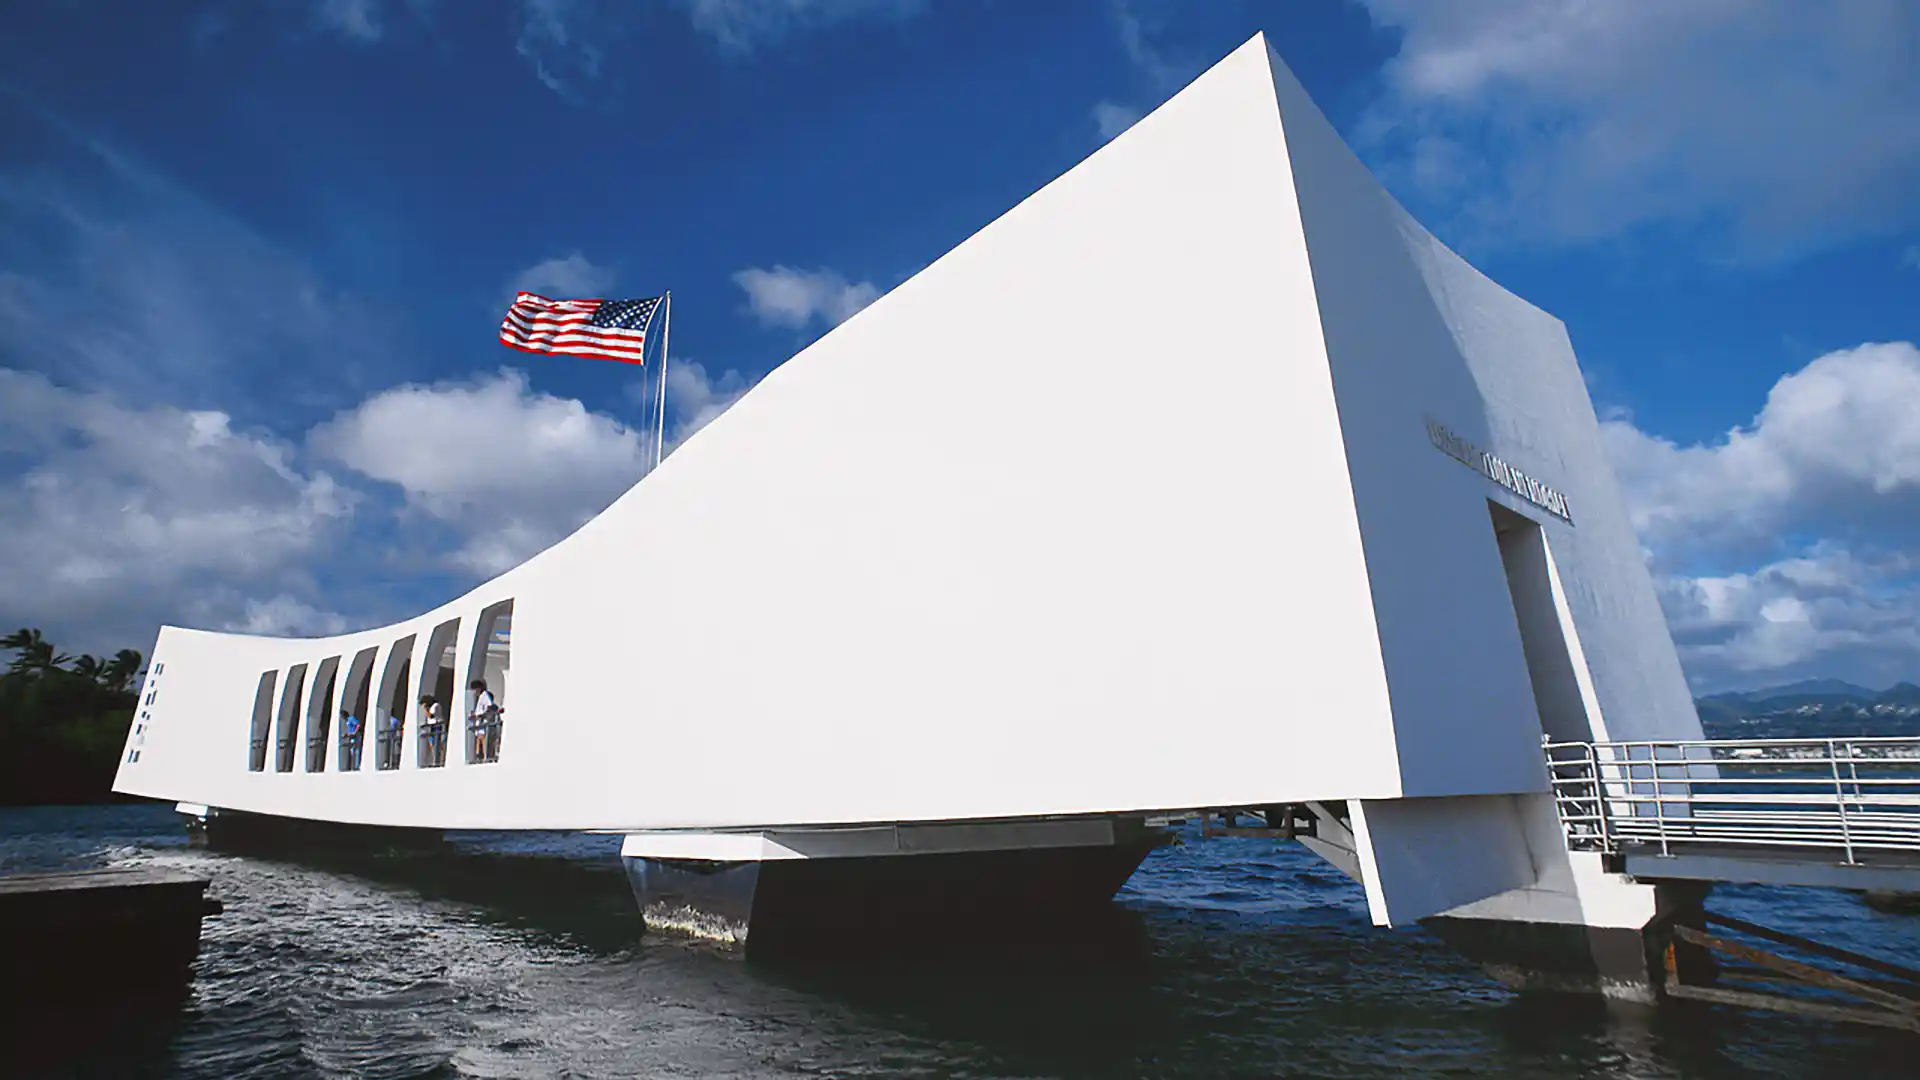 View of white structure with waving American flag above at Pearl Harbor Memorial in Hawaii.